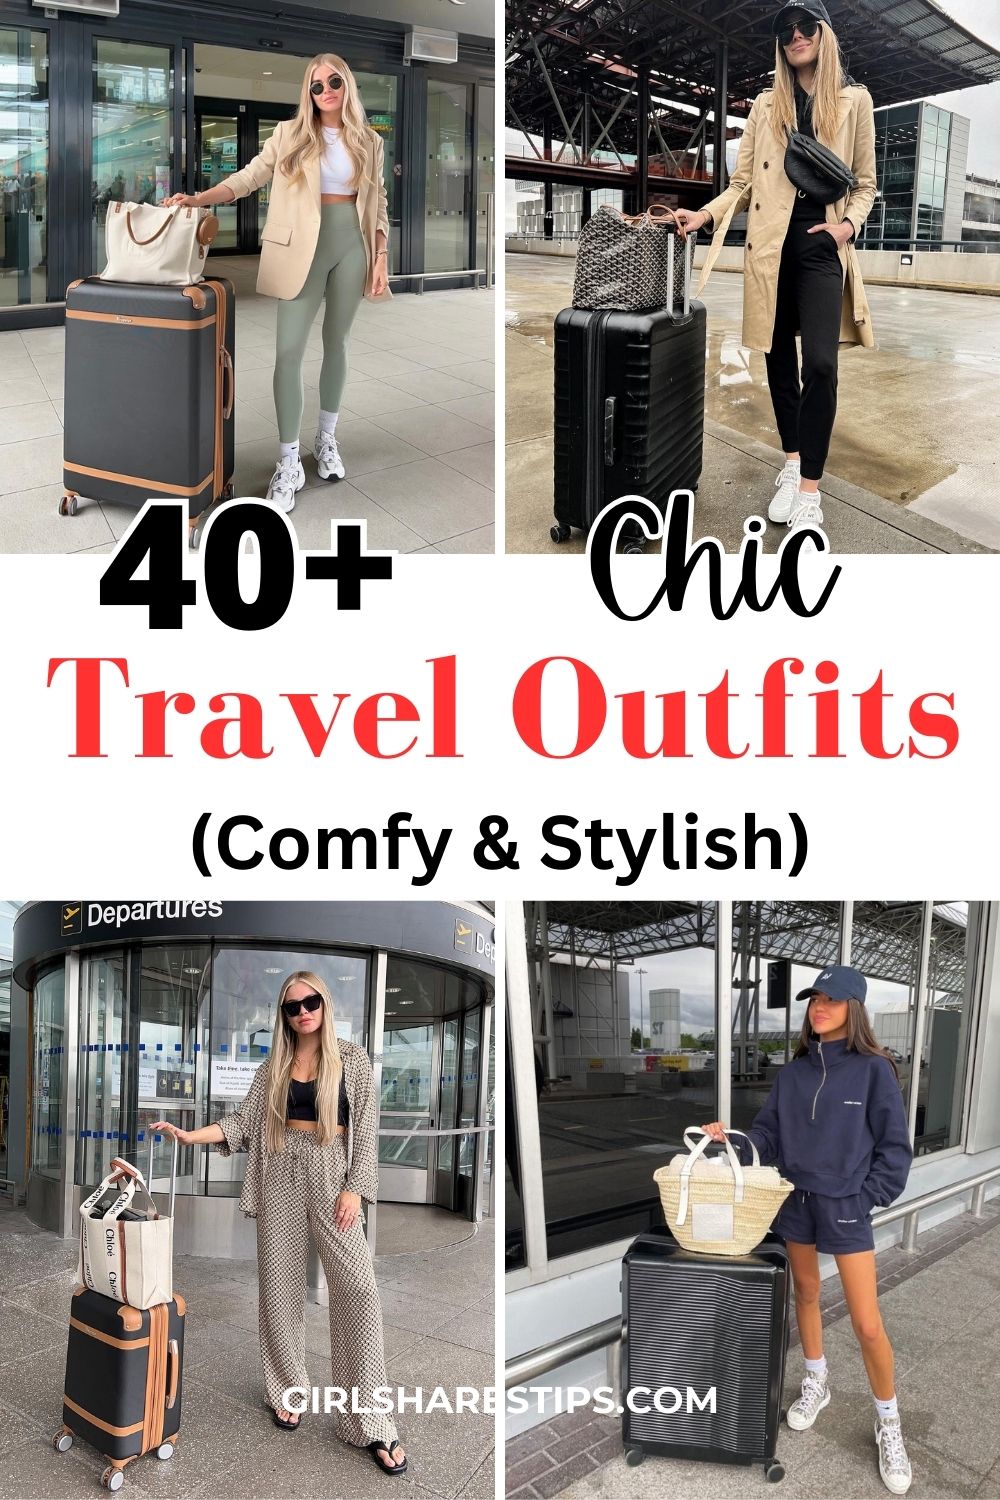 chic travel outfits and airport outfits collage